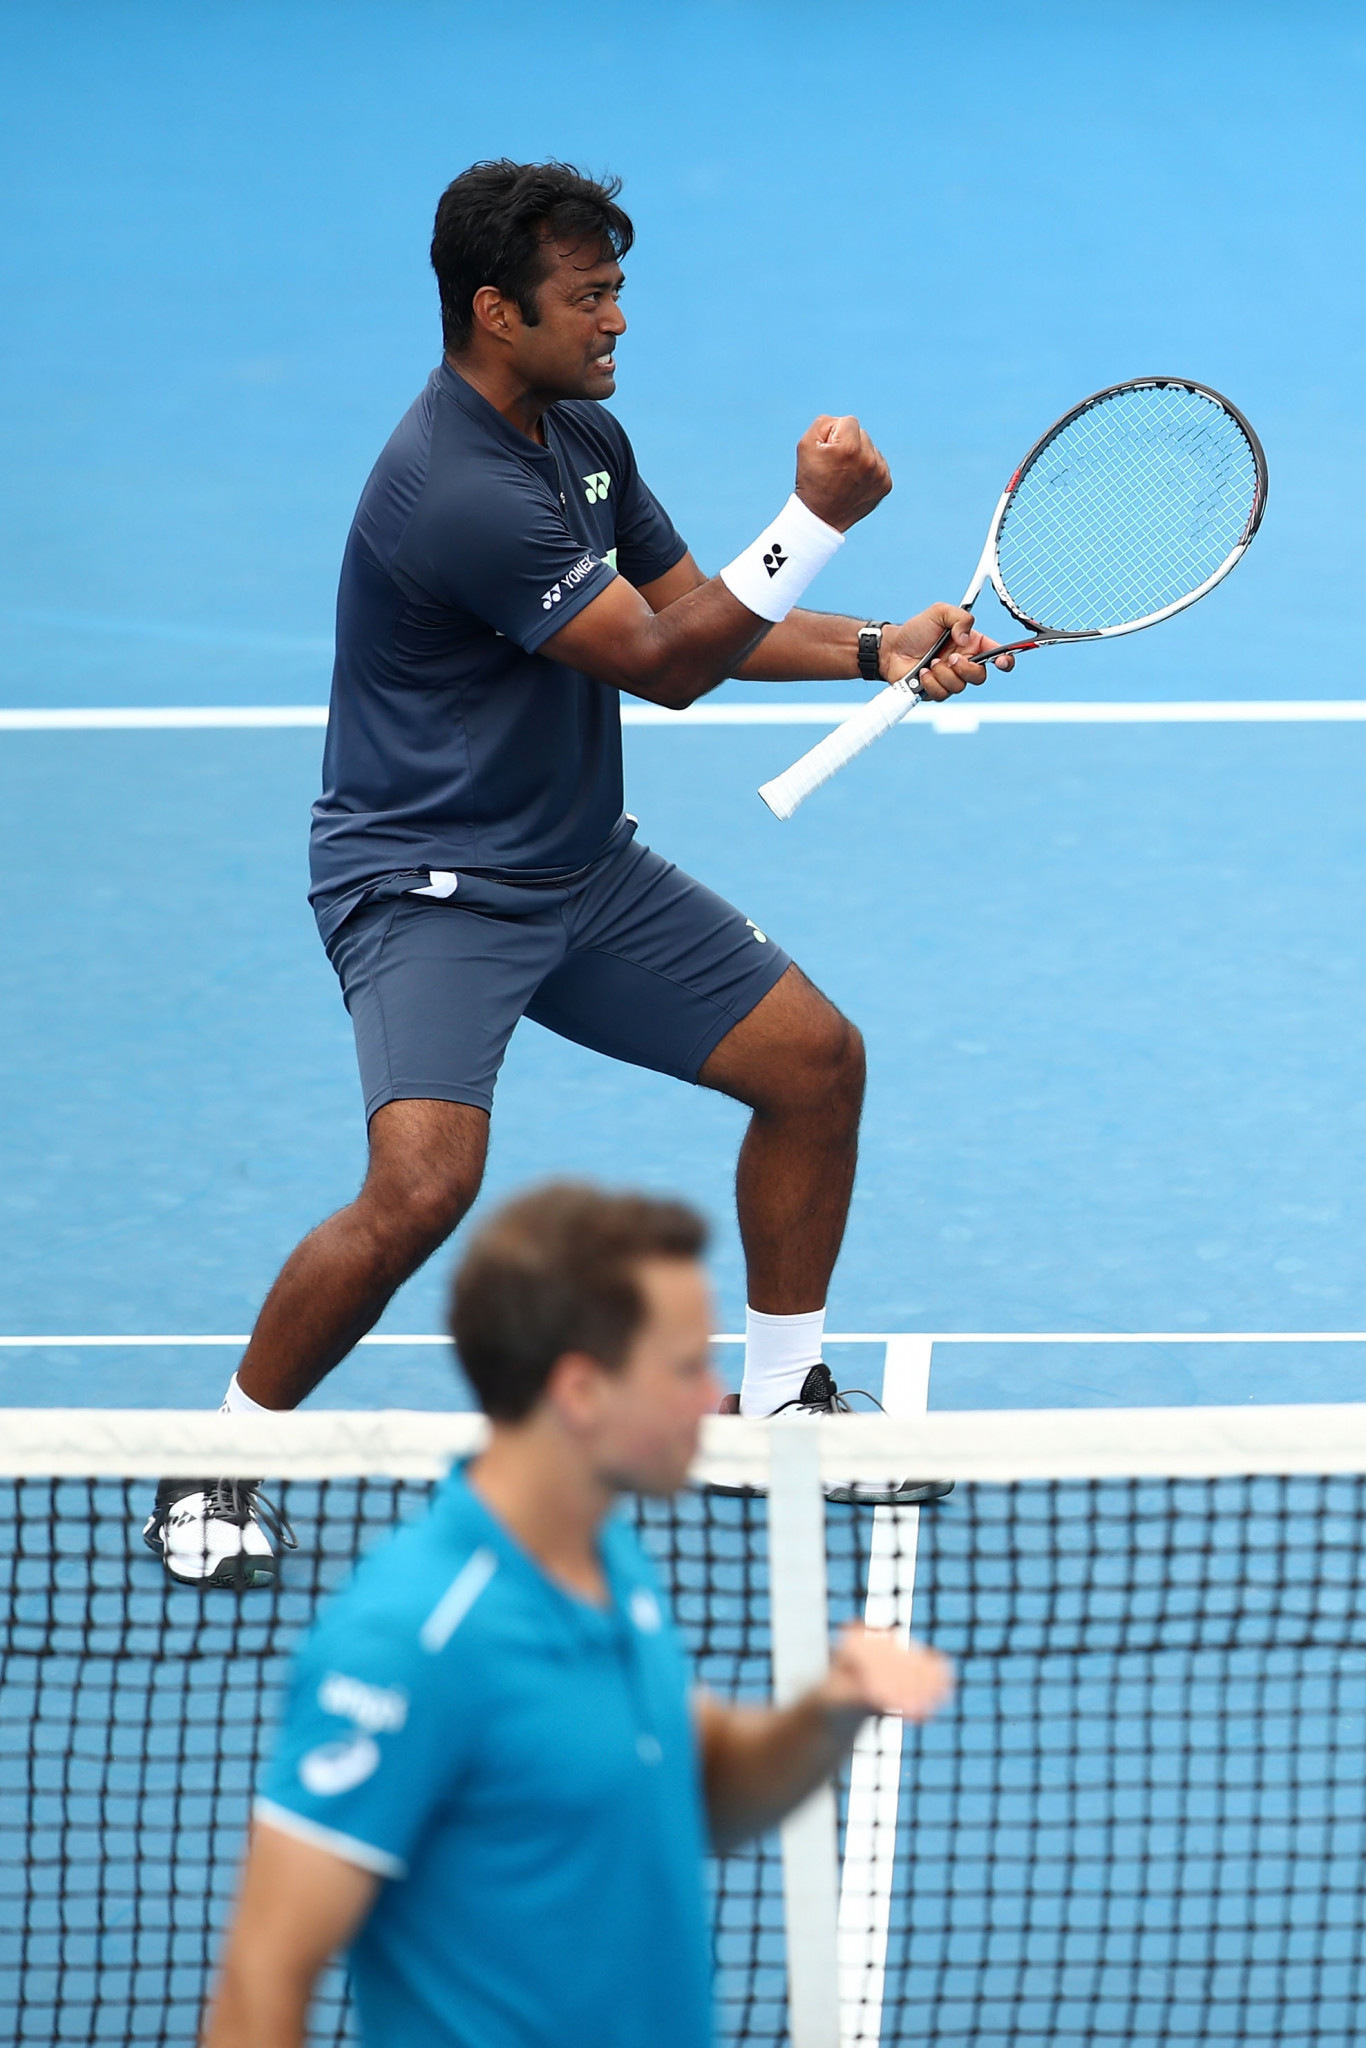 Veteran Paes ready to extend record Olympic run by playing at Tokyo 2020 Games